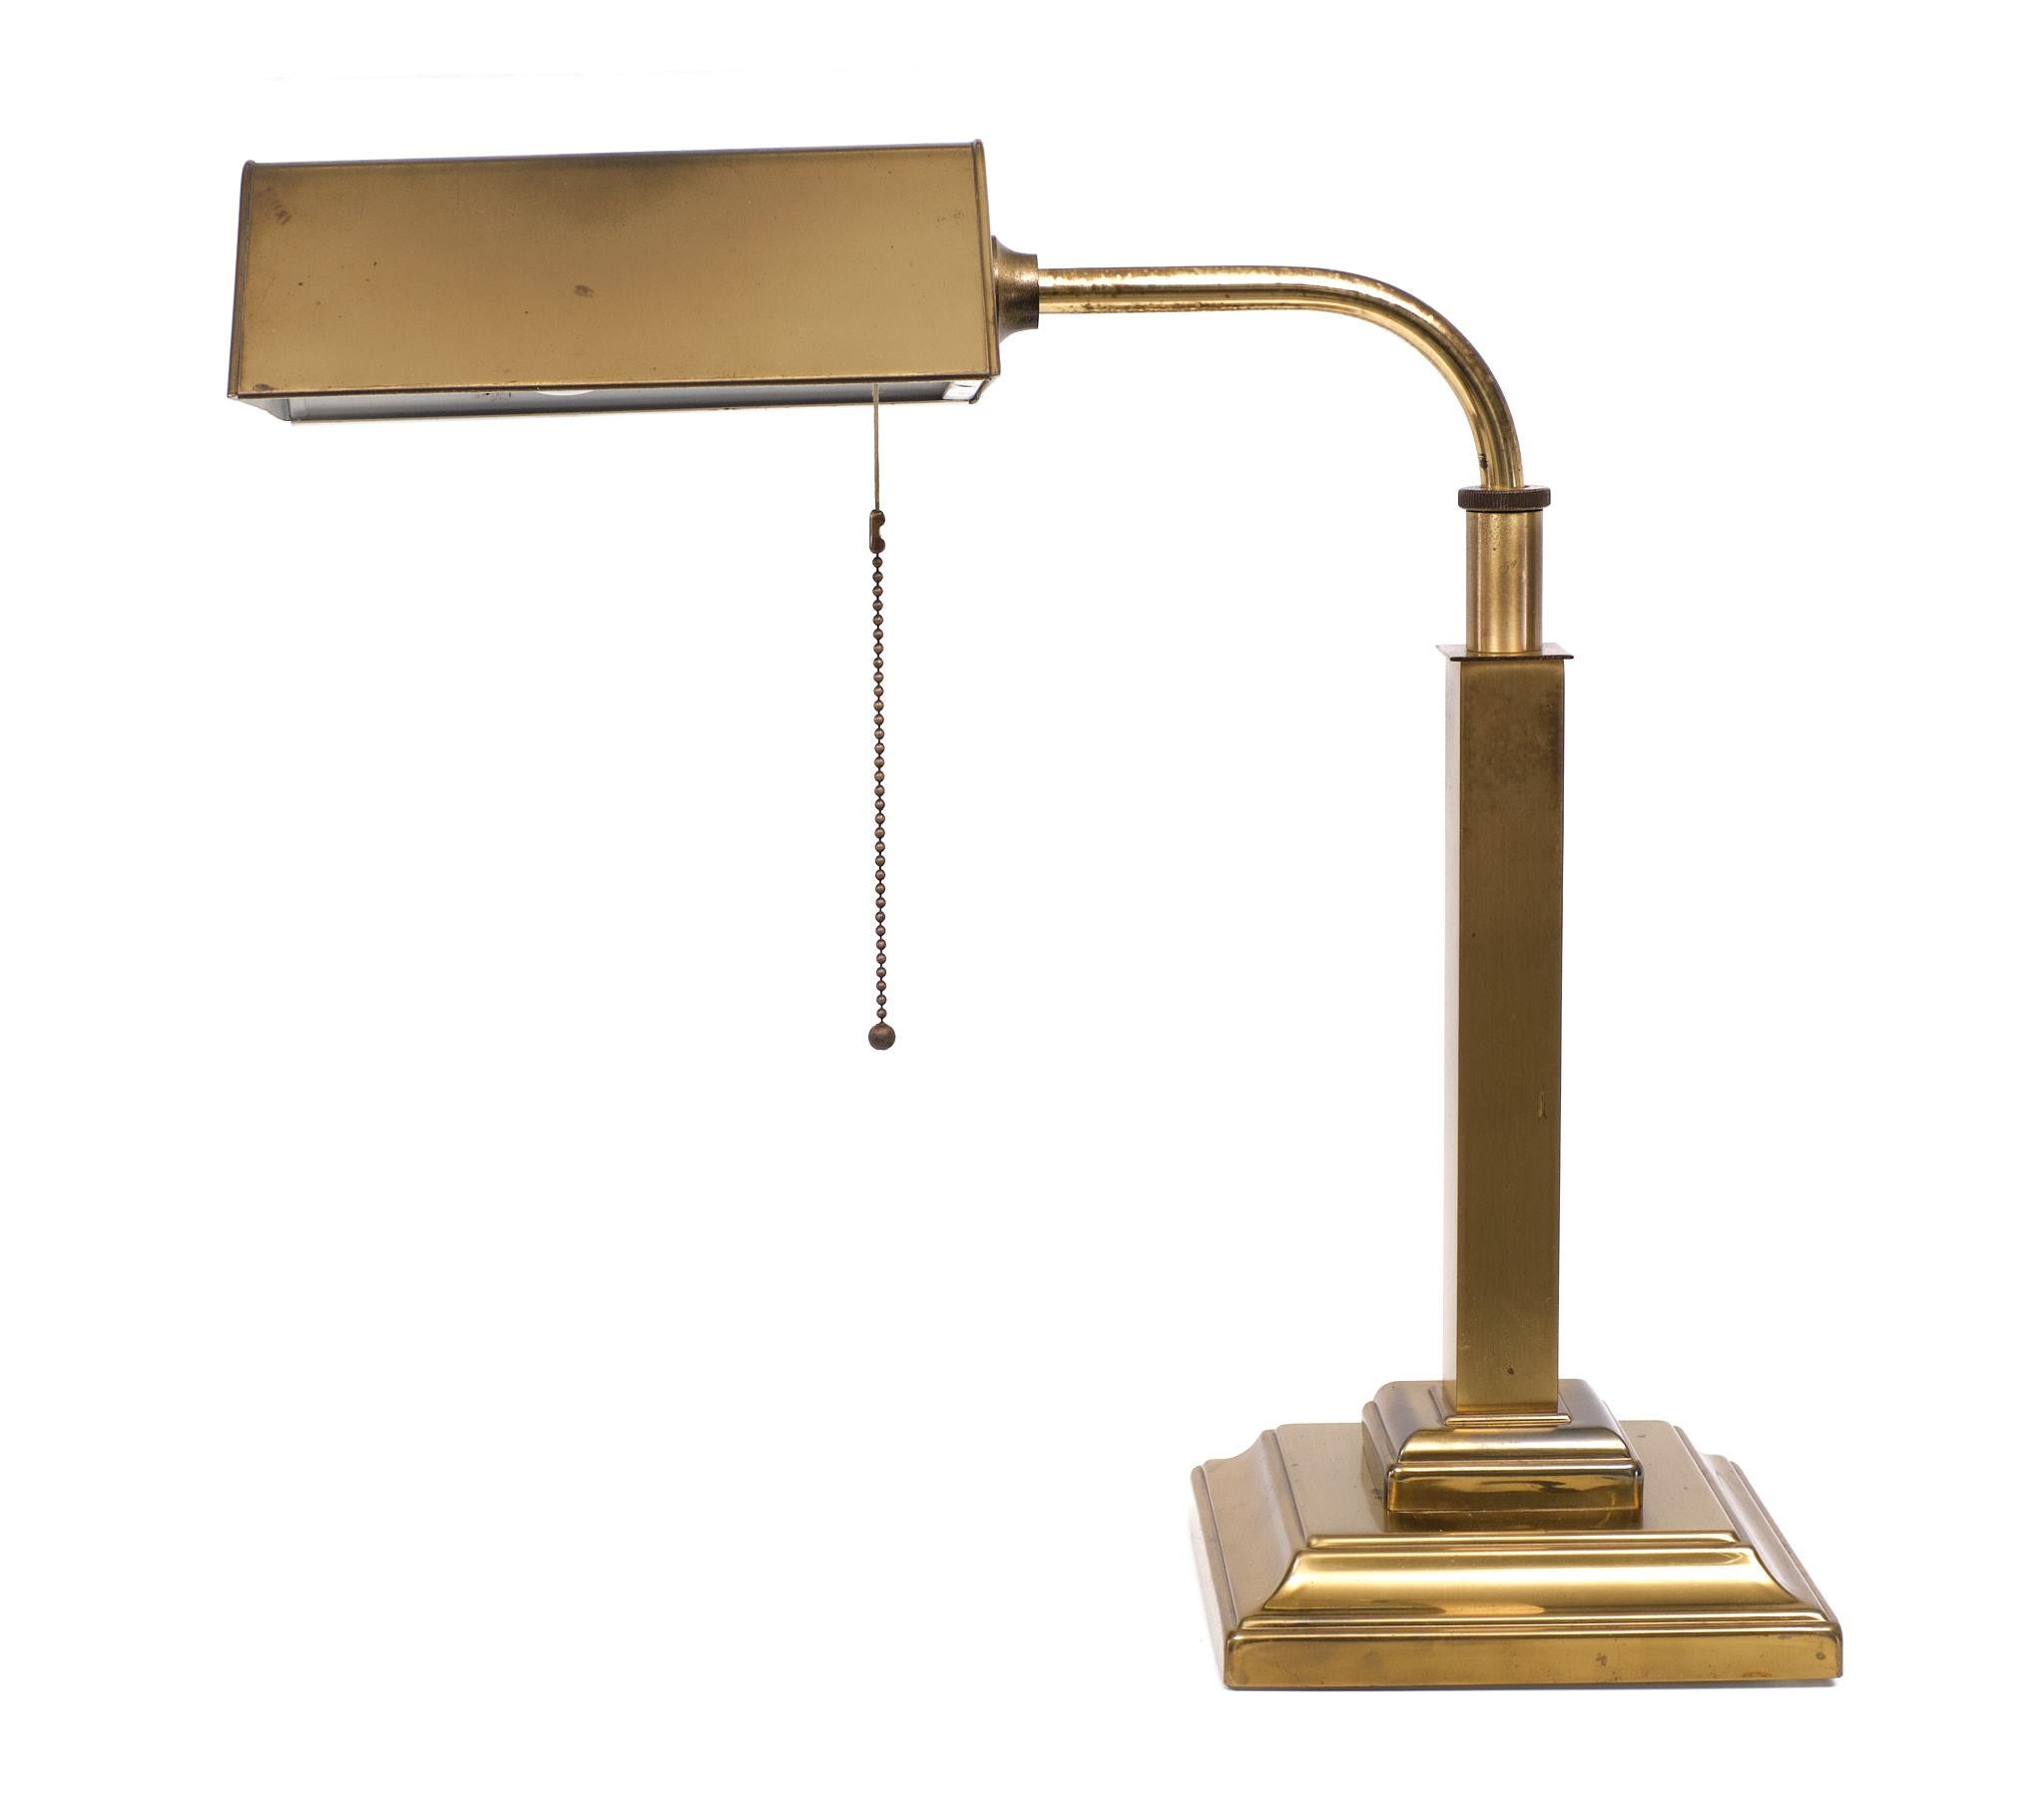 Very nice Brass desk lamp . pull down switch .One large E27 bulb needed .
manufactured by Sölken Leuchten .Germany 1970s .adjustable in height .
comes with just the right amount of patine  